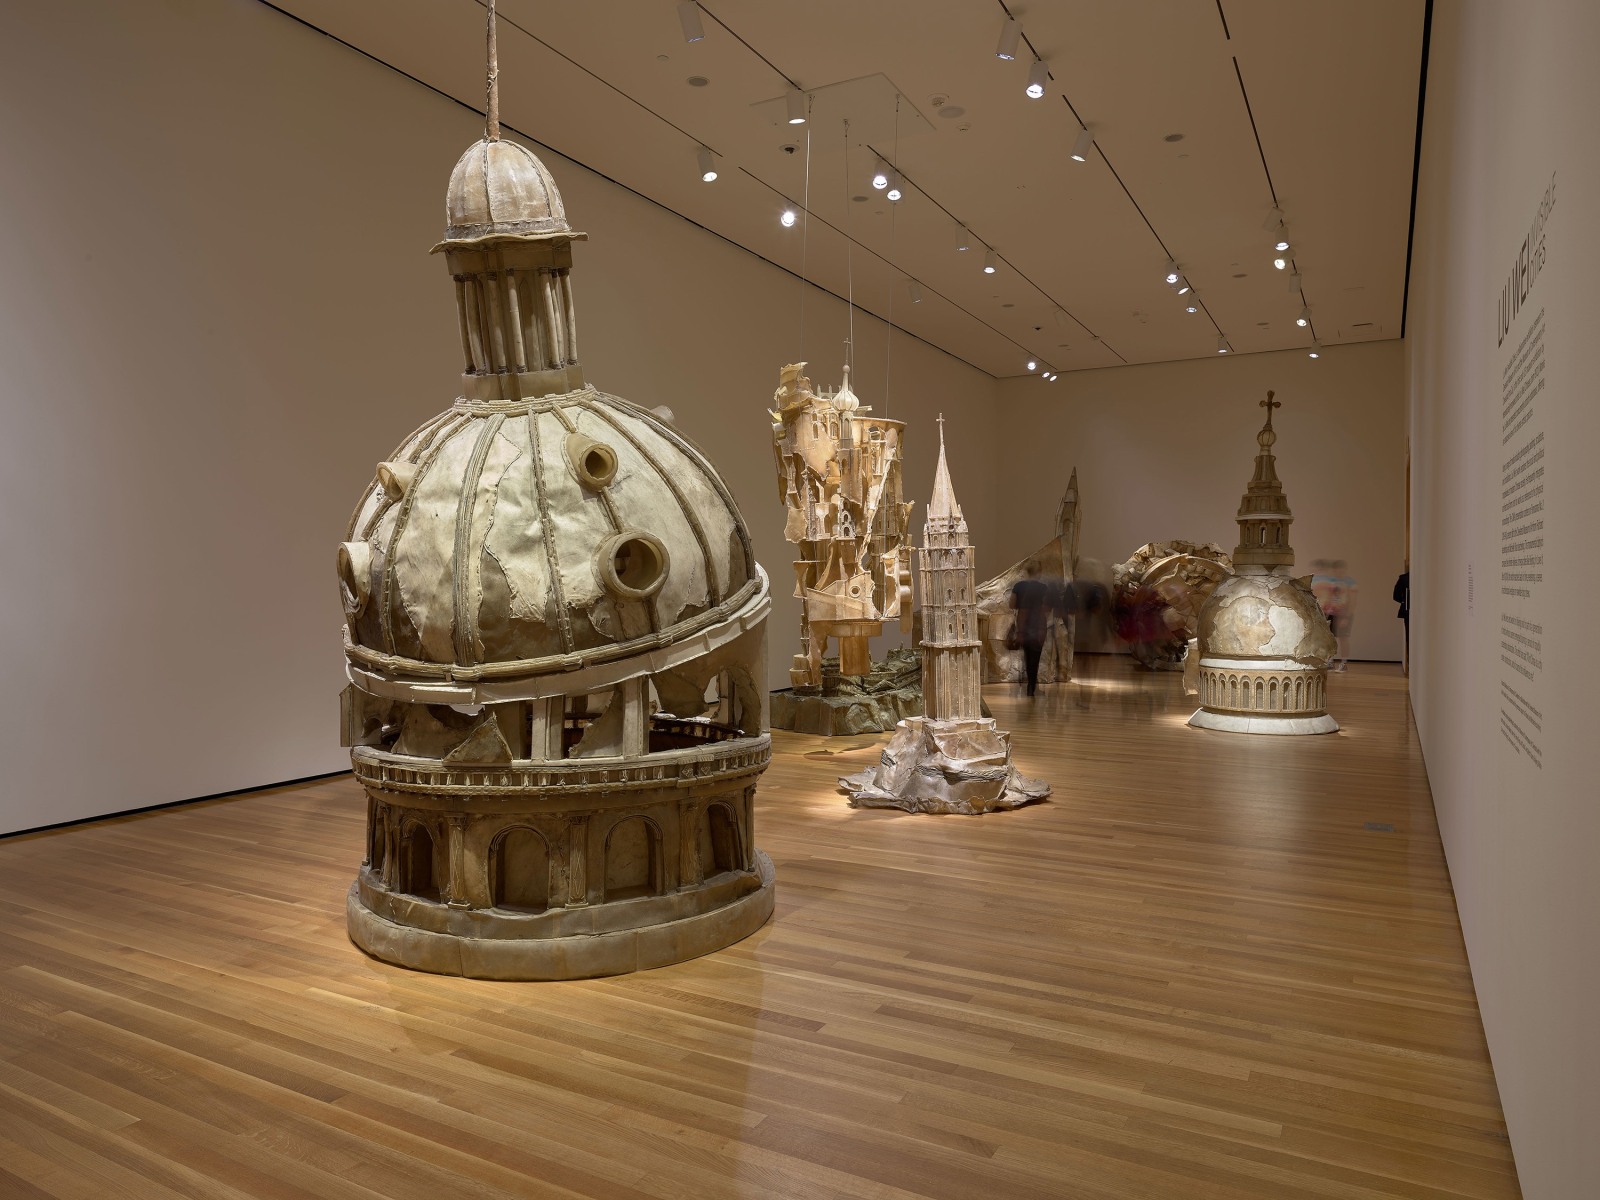 View 2 of Liu Wei's solo museum exhibition titled Invisible Cities at the Cleveland Museum of Art